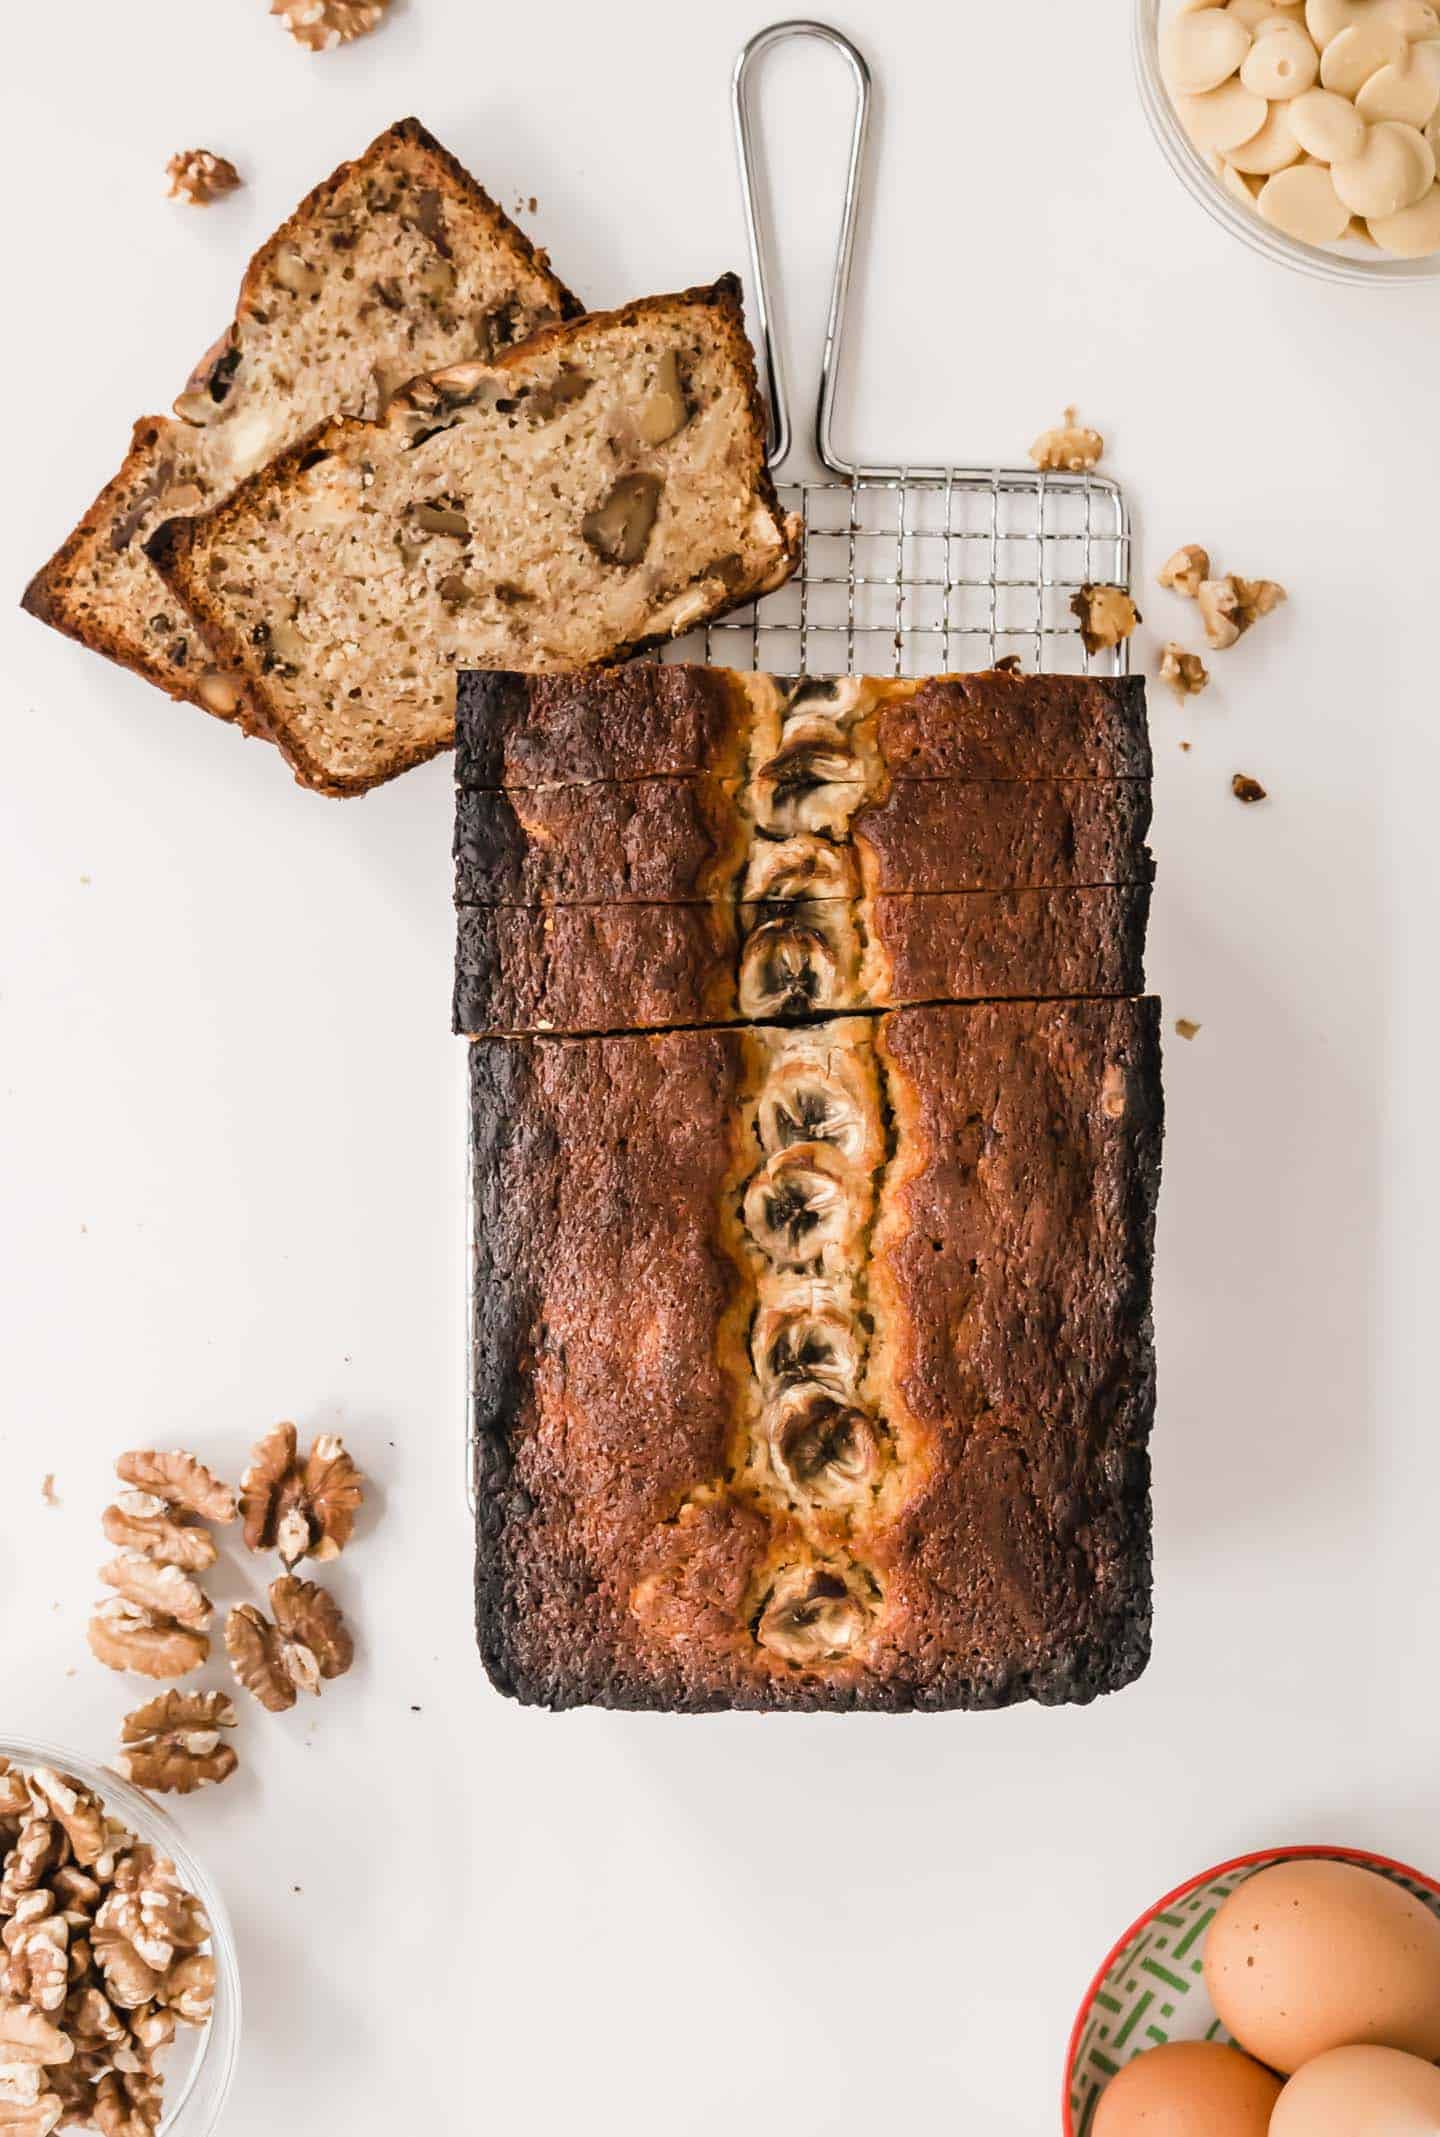 Banana Bread with some walnuts, eggs and white chocolate chips around it